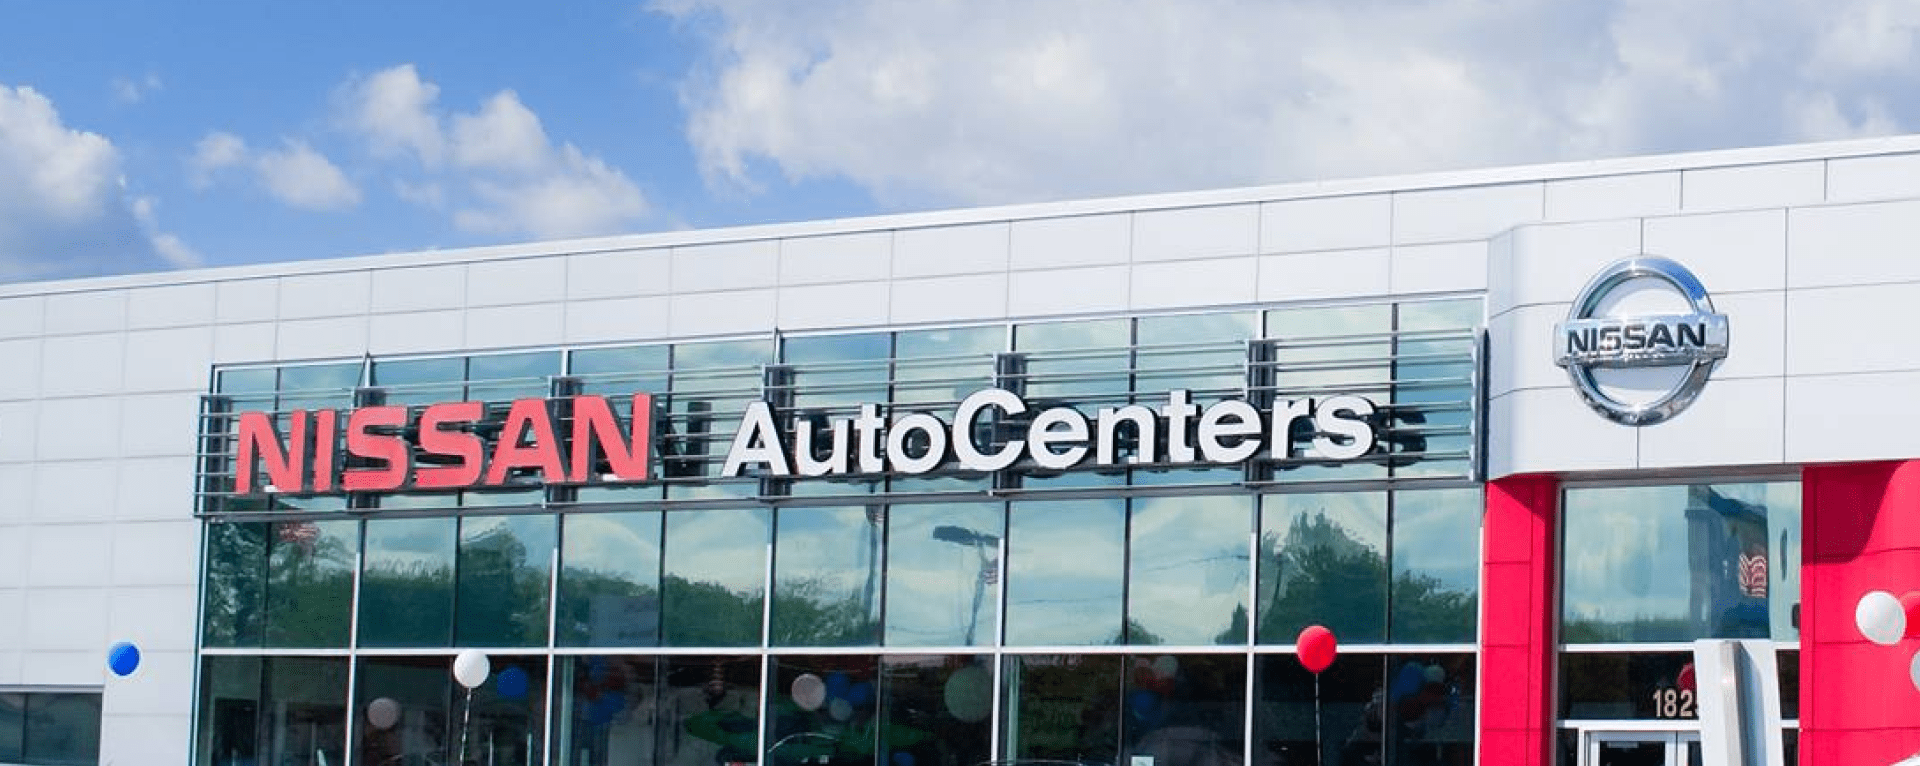 Exterior view of the AutoCenters Nissan dealership